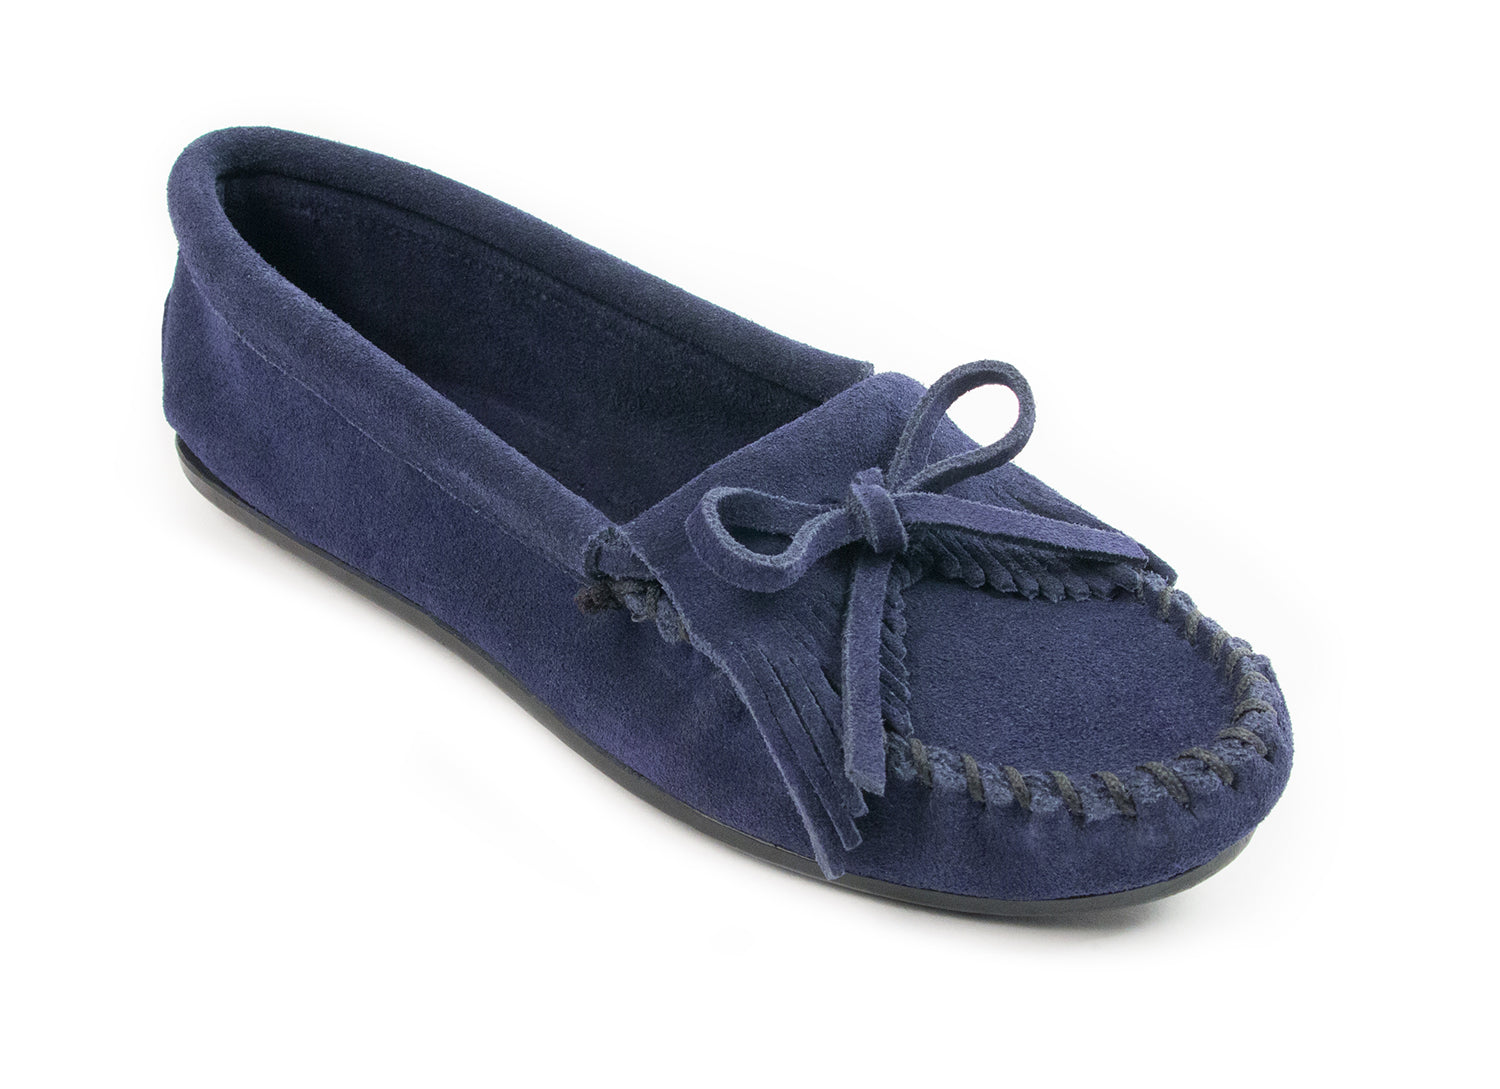 Kilty Hardsole Moccasin in Navy from 3/4 Angle View